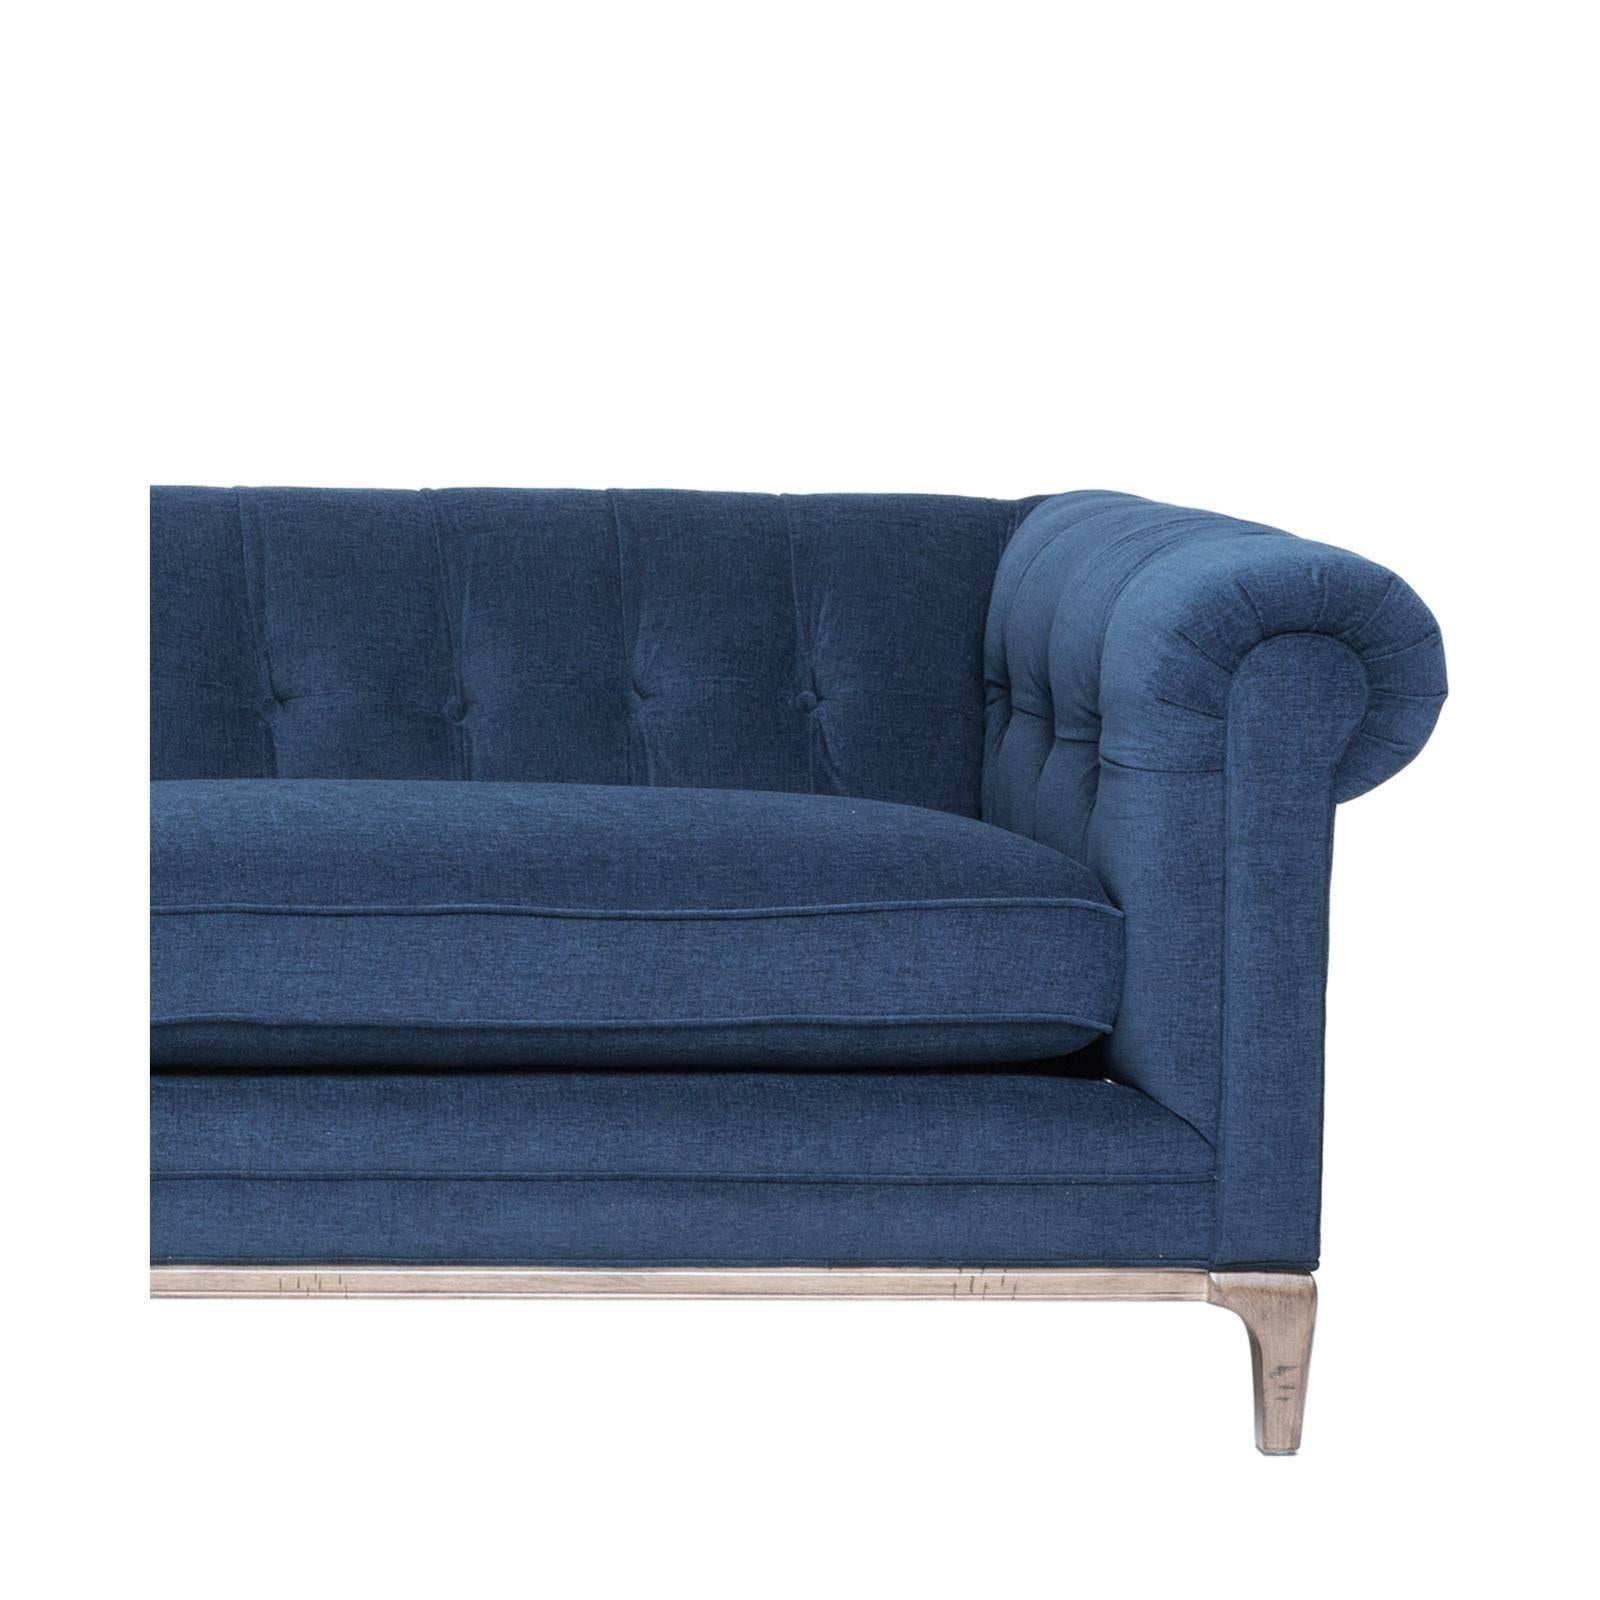 Simple elegance defines the Morgan sofa. This sofa is handmade of hardwoods, upholstered in supple navy chenille, and crafted with soft curves. 

